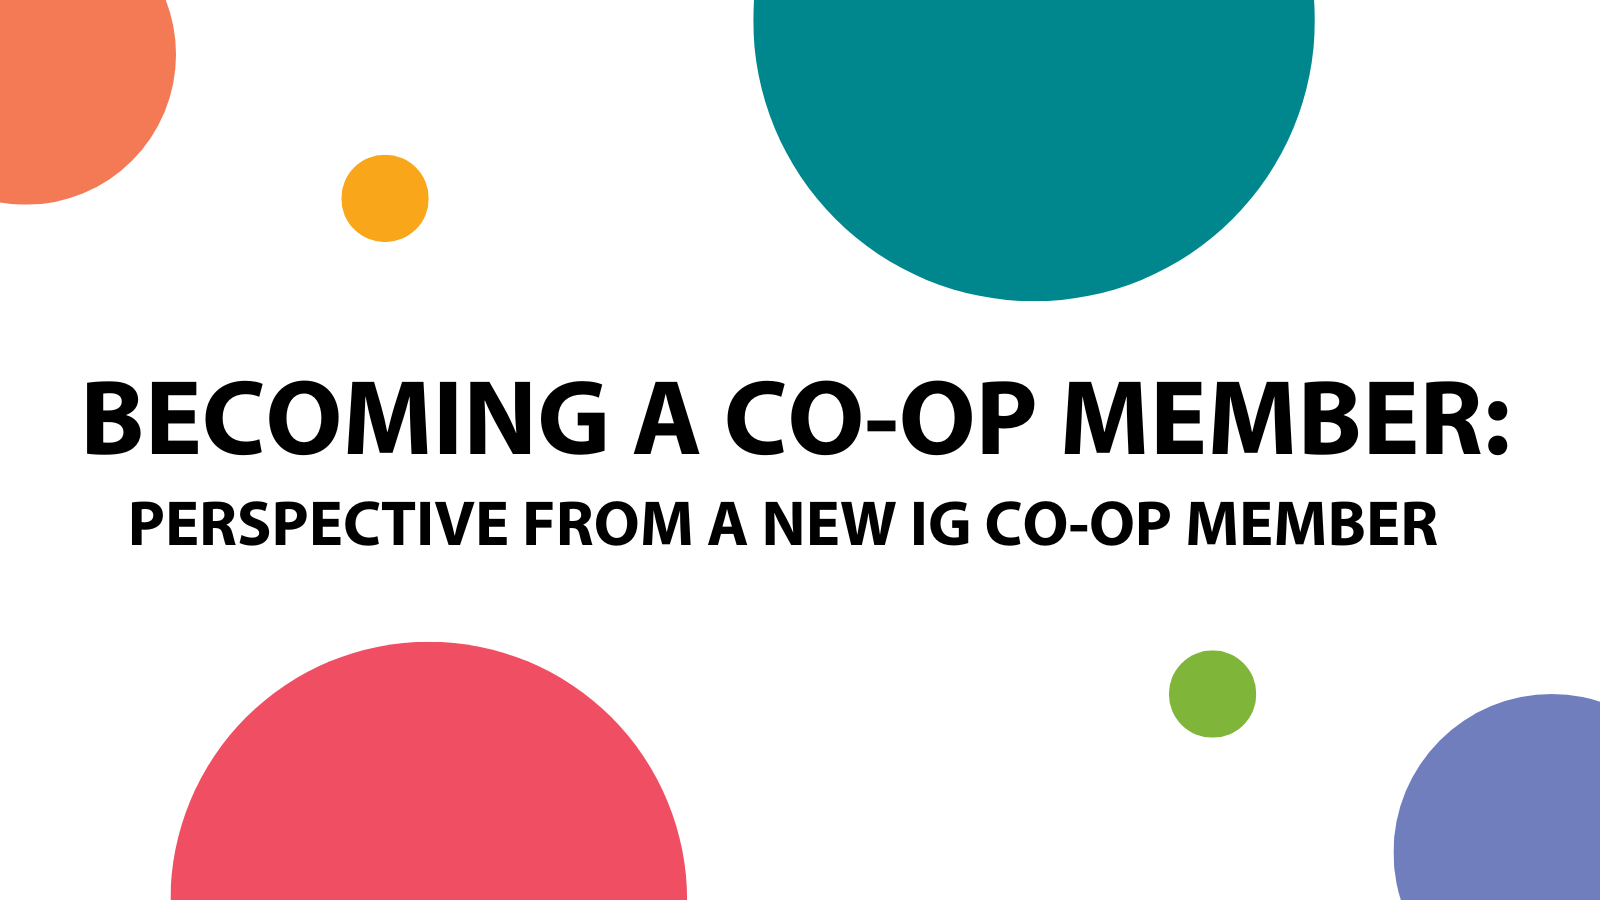 Graphic with the title "Becoming a co-op member: perspective from a new IG co-op member." There are colored dots around the edge of the graphic